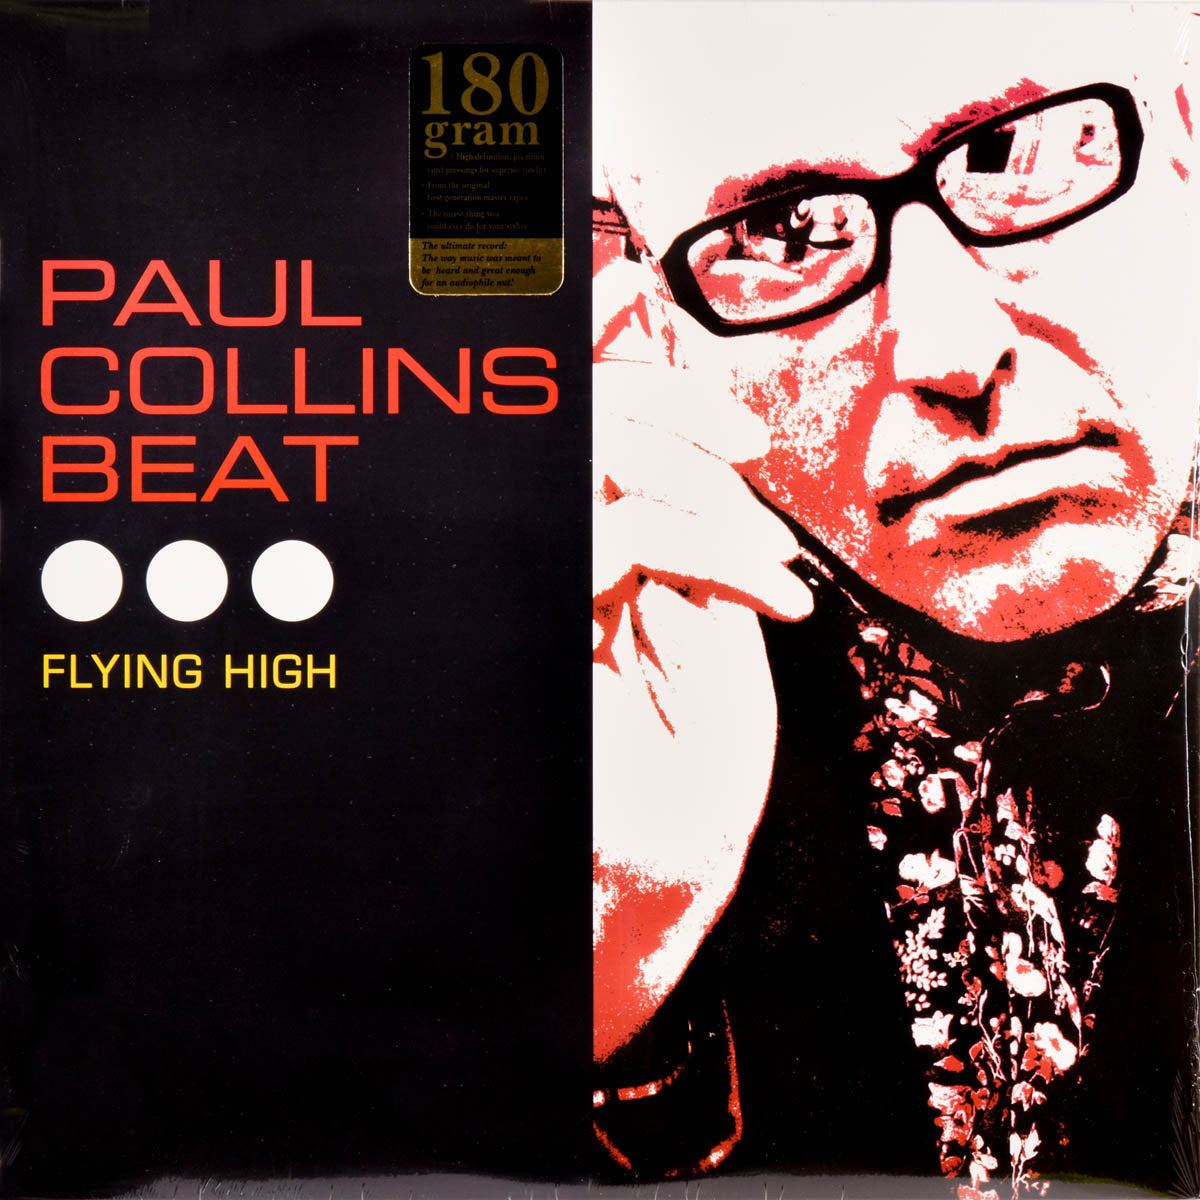 Paul Collins Beat- Flying High LP ~EX THE BEAT!